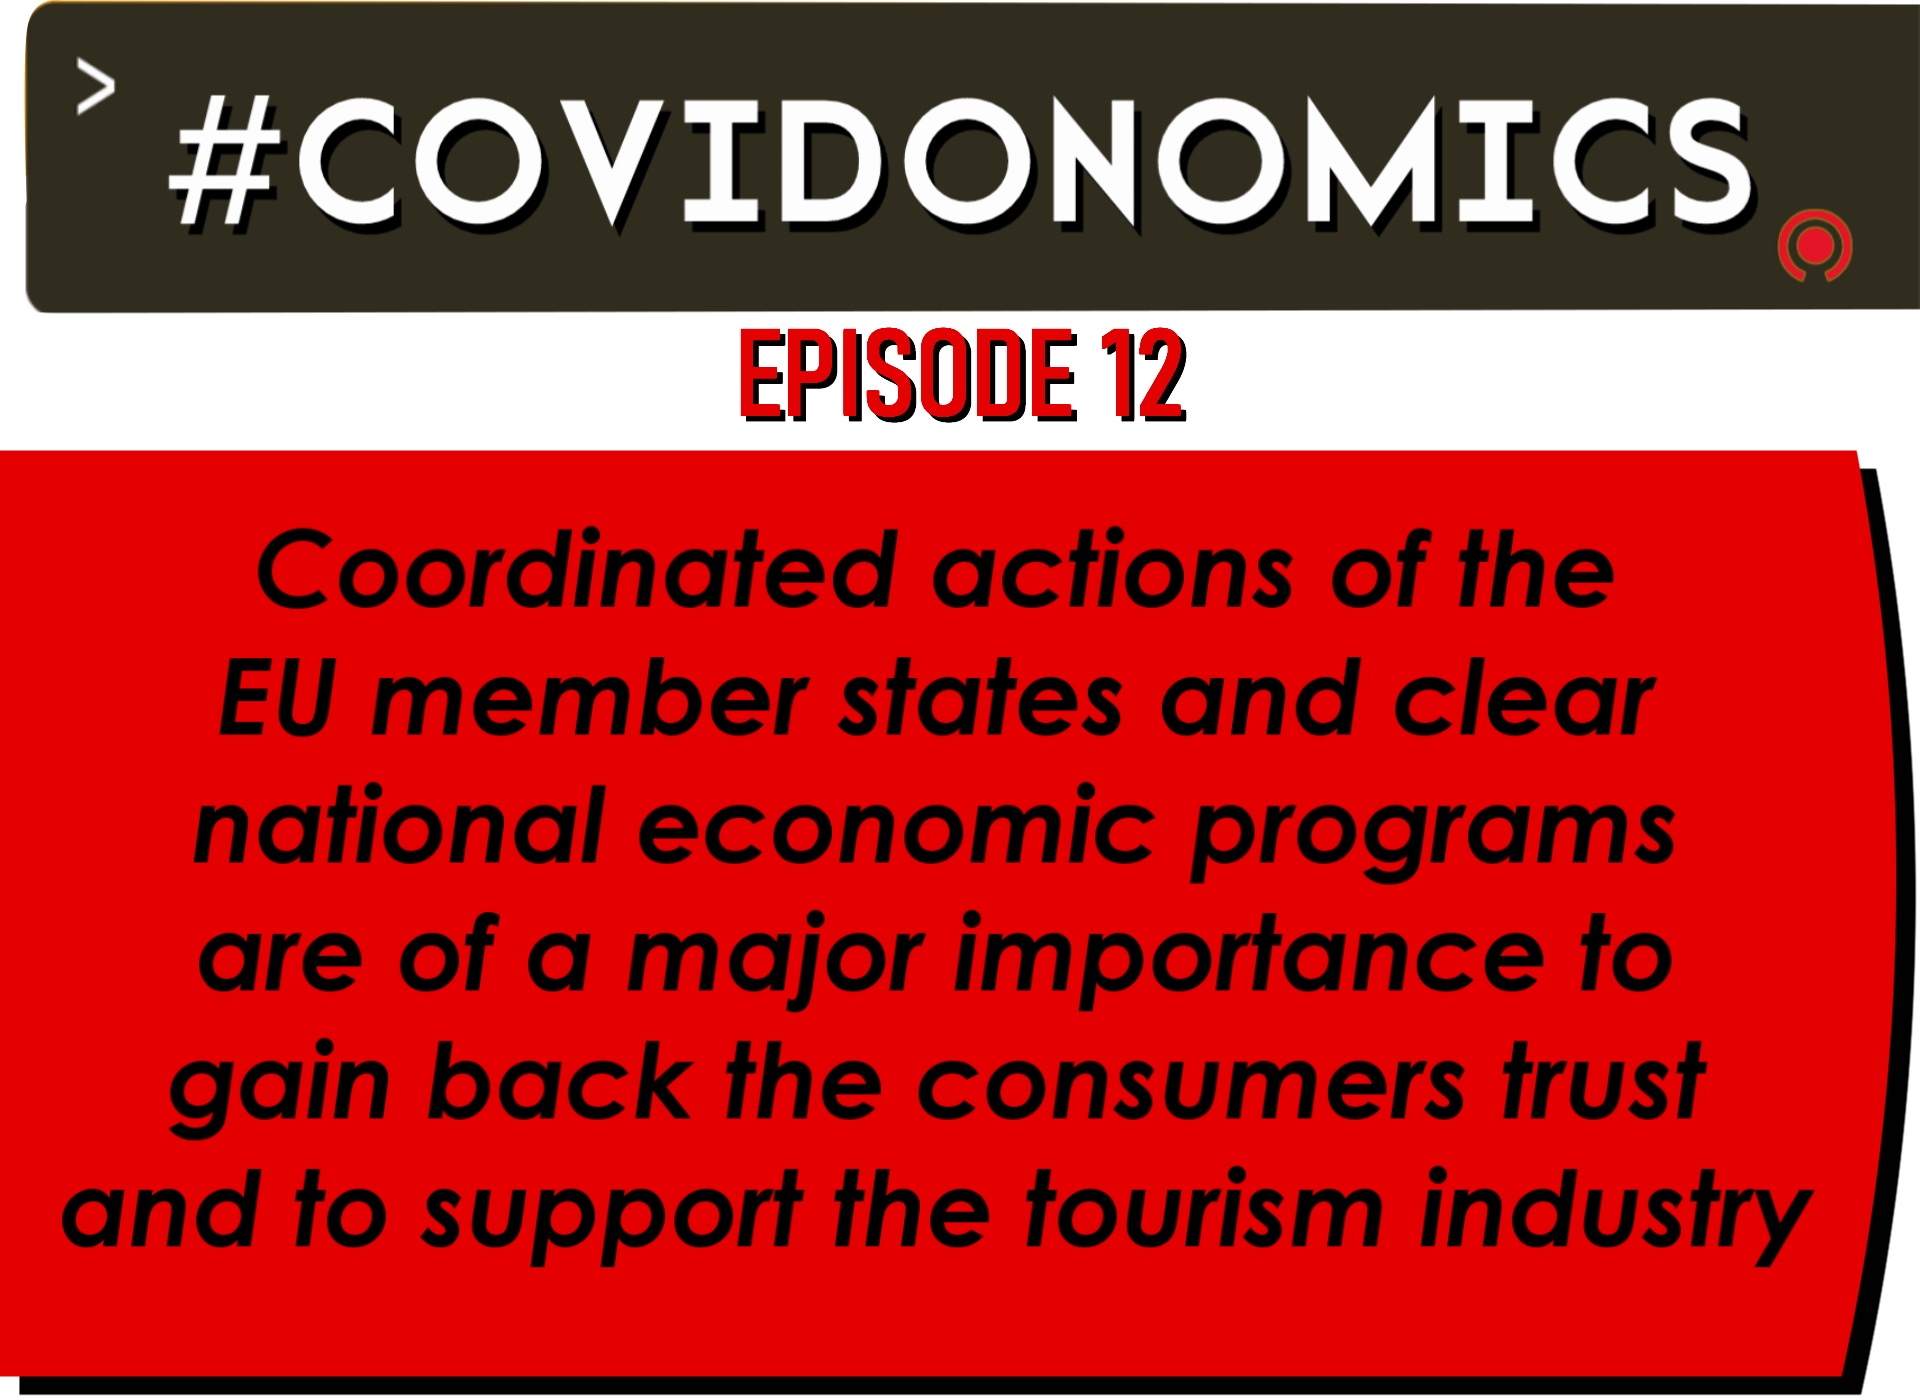 Coordinated actions of the EU member states and clear national economic programs are of a major importance to gain back consumer’s trust and to support the tourism industry